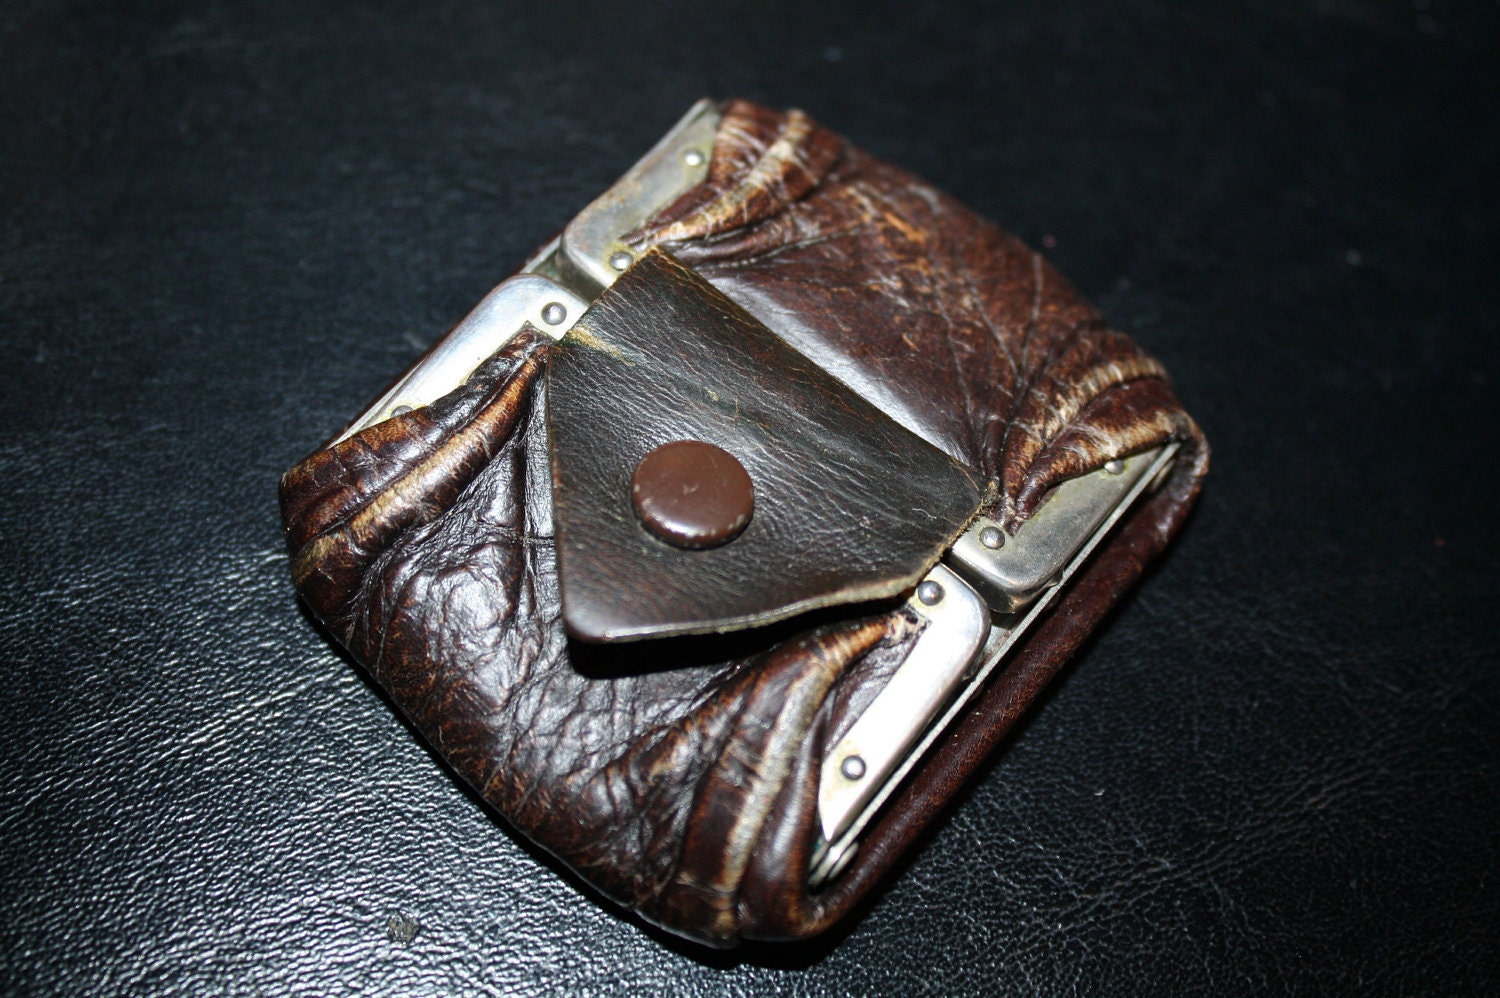 1900s Mens folding leather Coin Purse owned by by Ablast2thepast